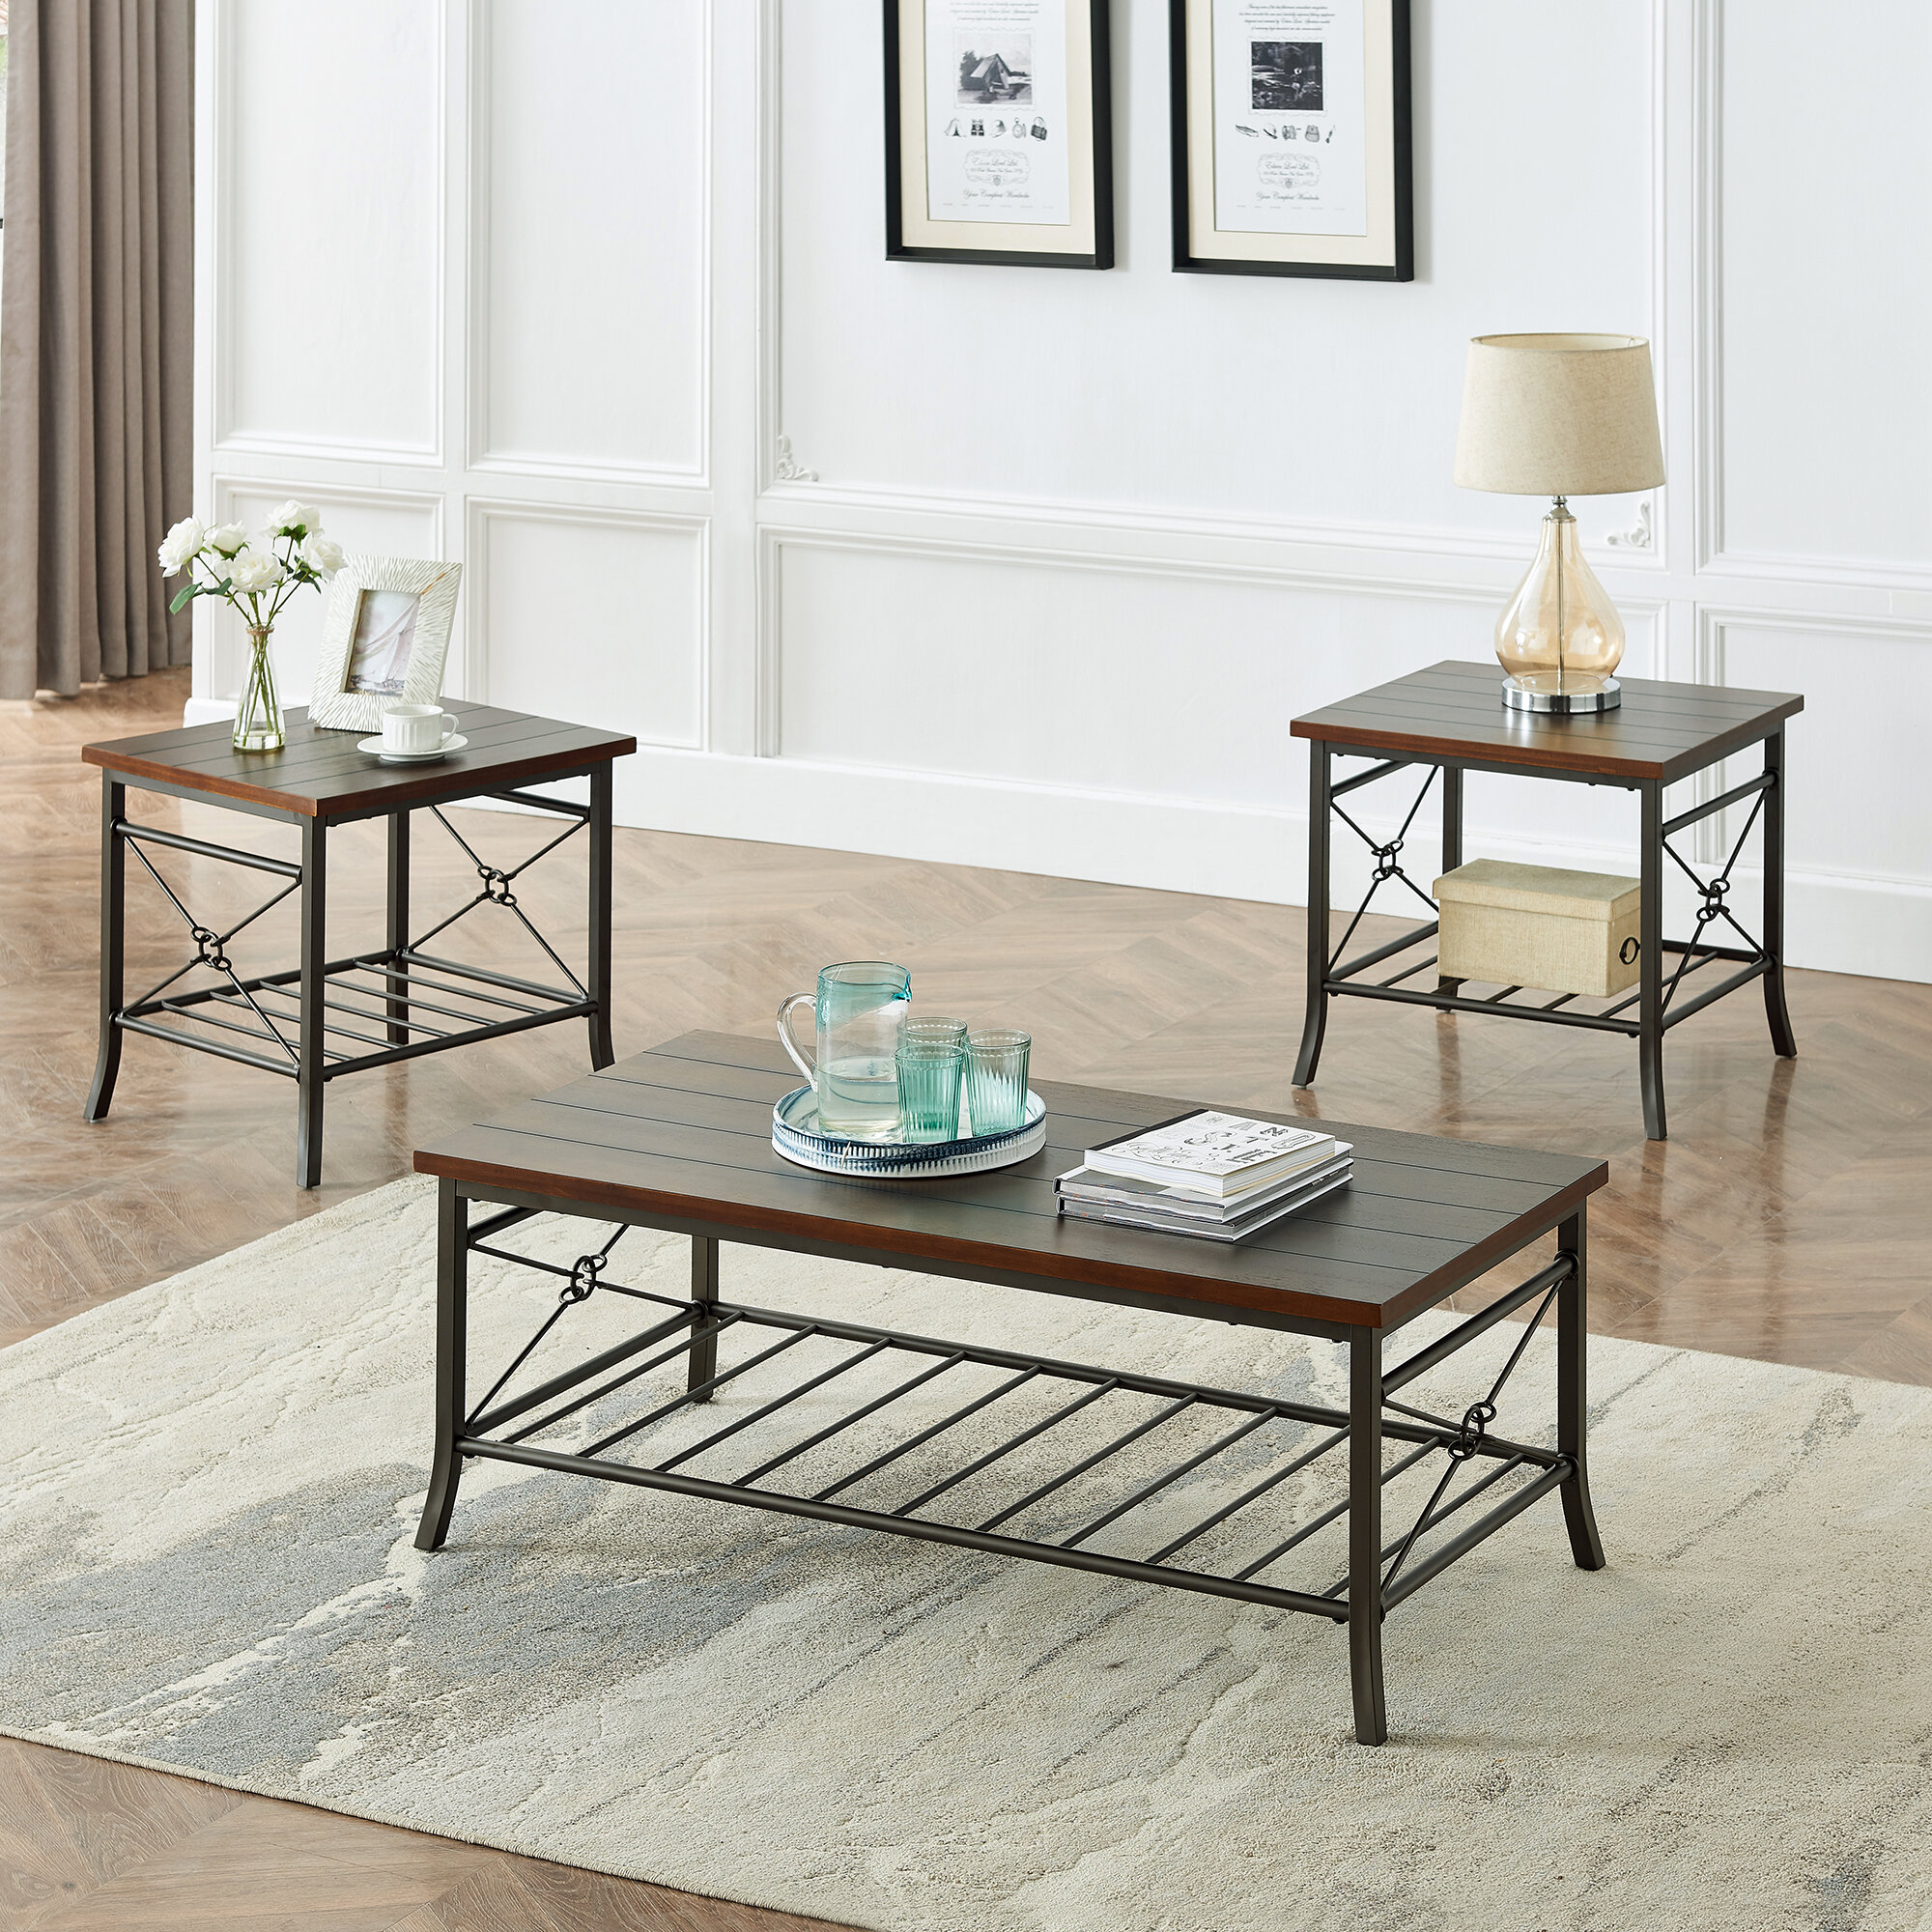 3 Piece Coffee Table Sets With Storage Coaster Furniture 3 Piece Glass Top Coffee Table Set